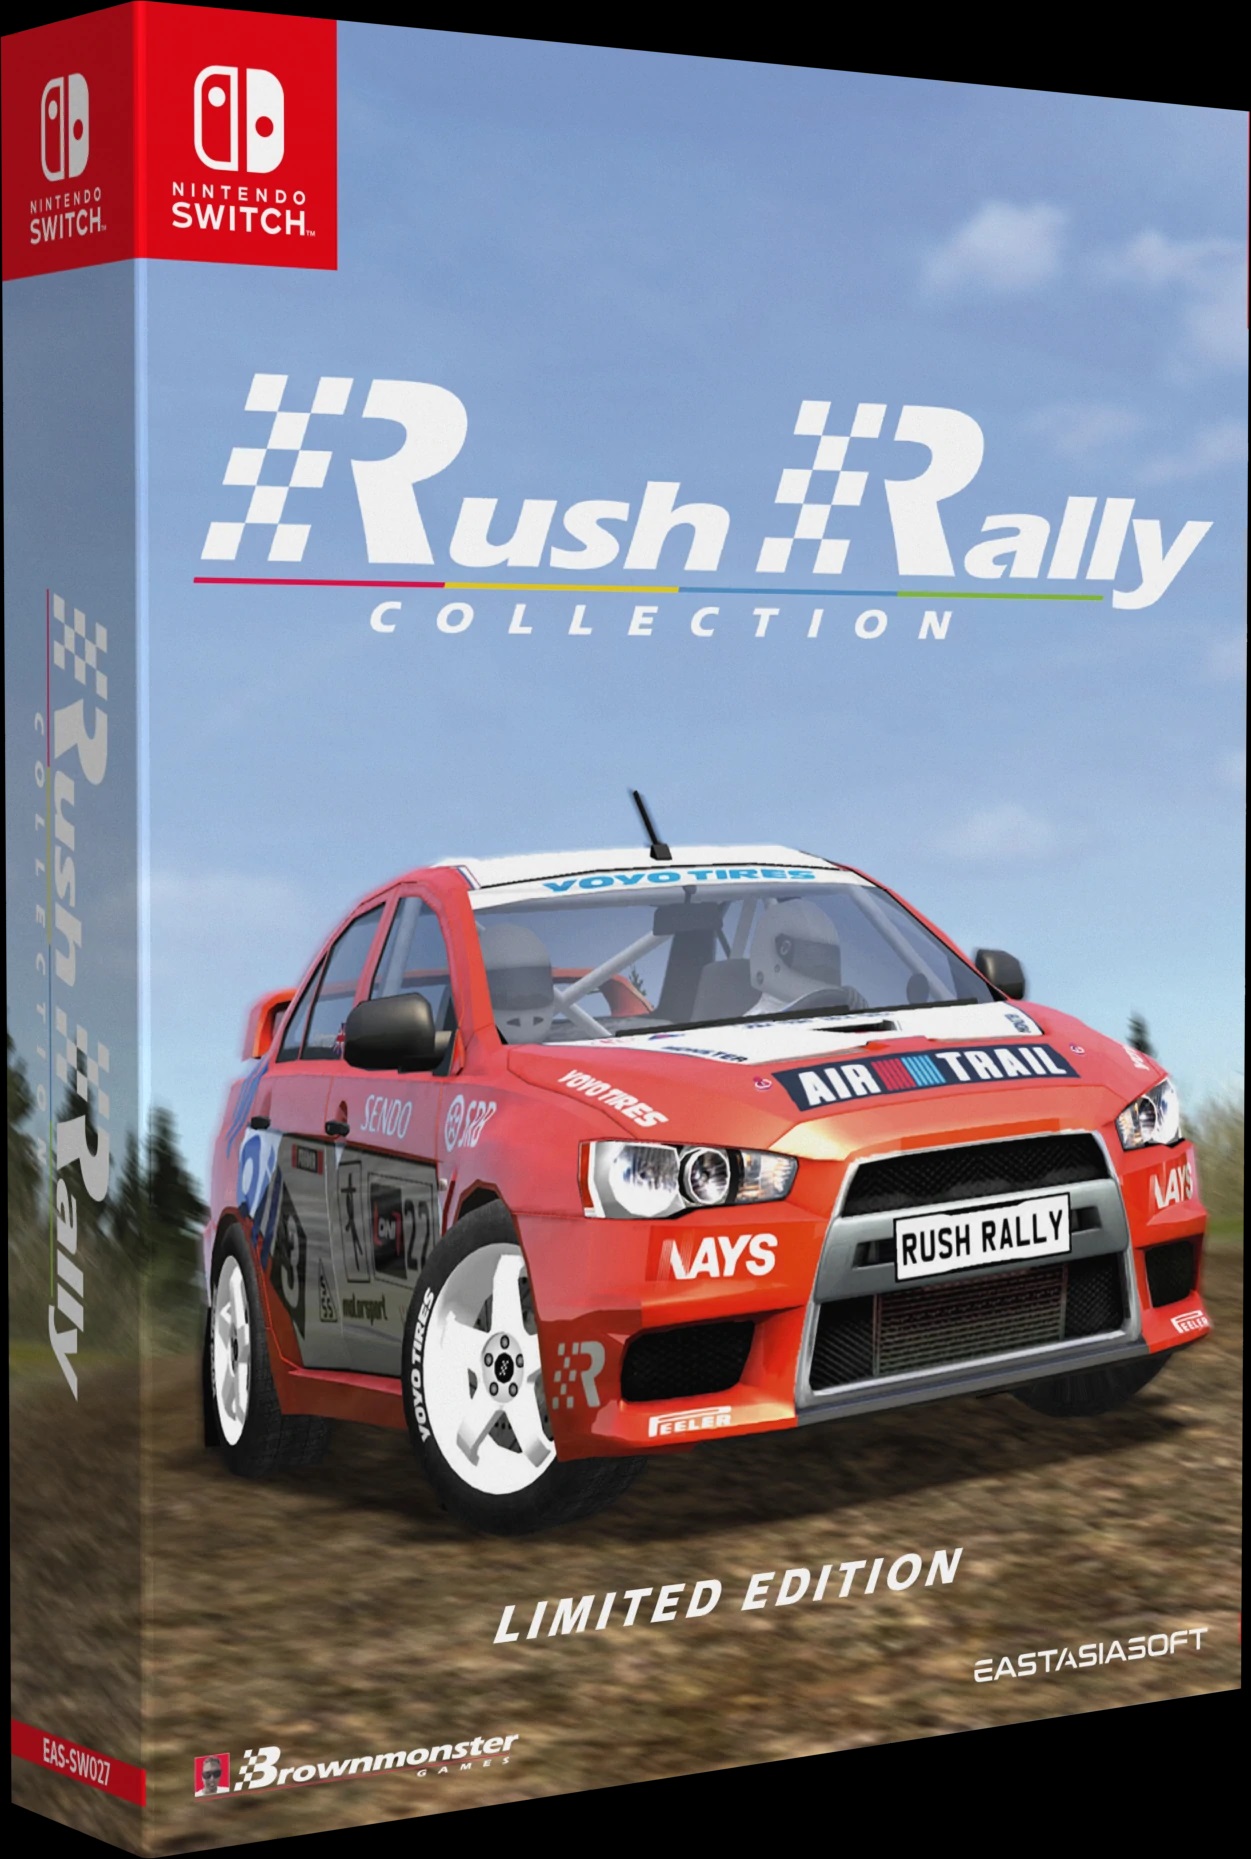 RUSH RALLY COLLECTION (LIMITED EDITION)